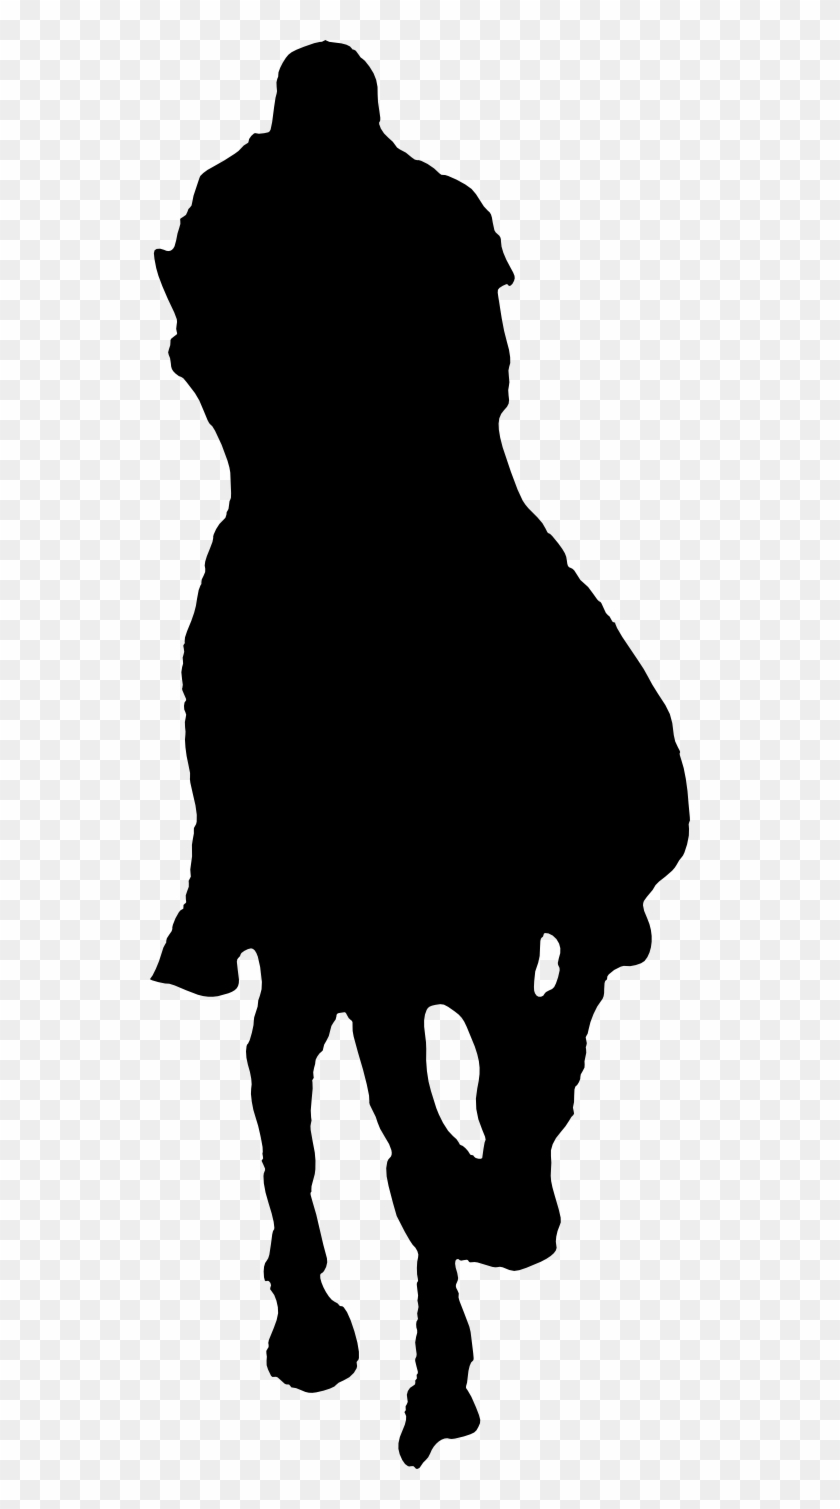 Free Download - Lion Silhouette Png #655905